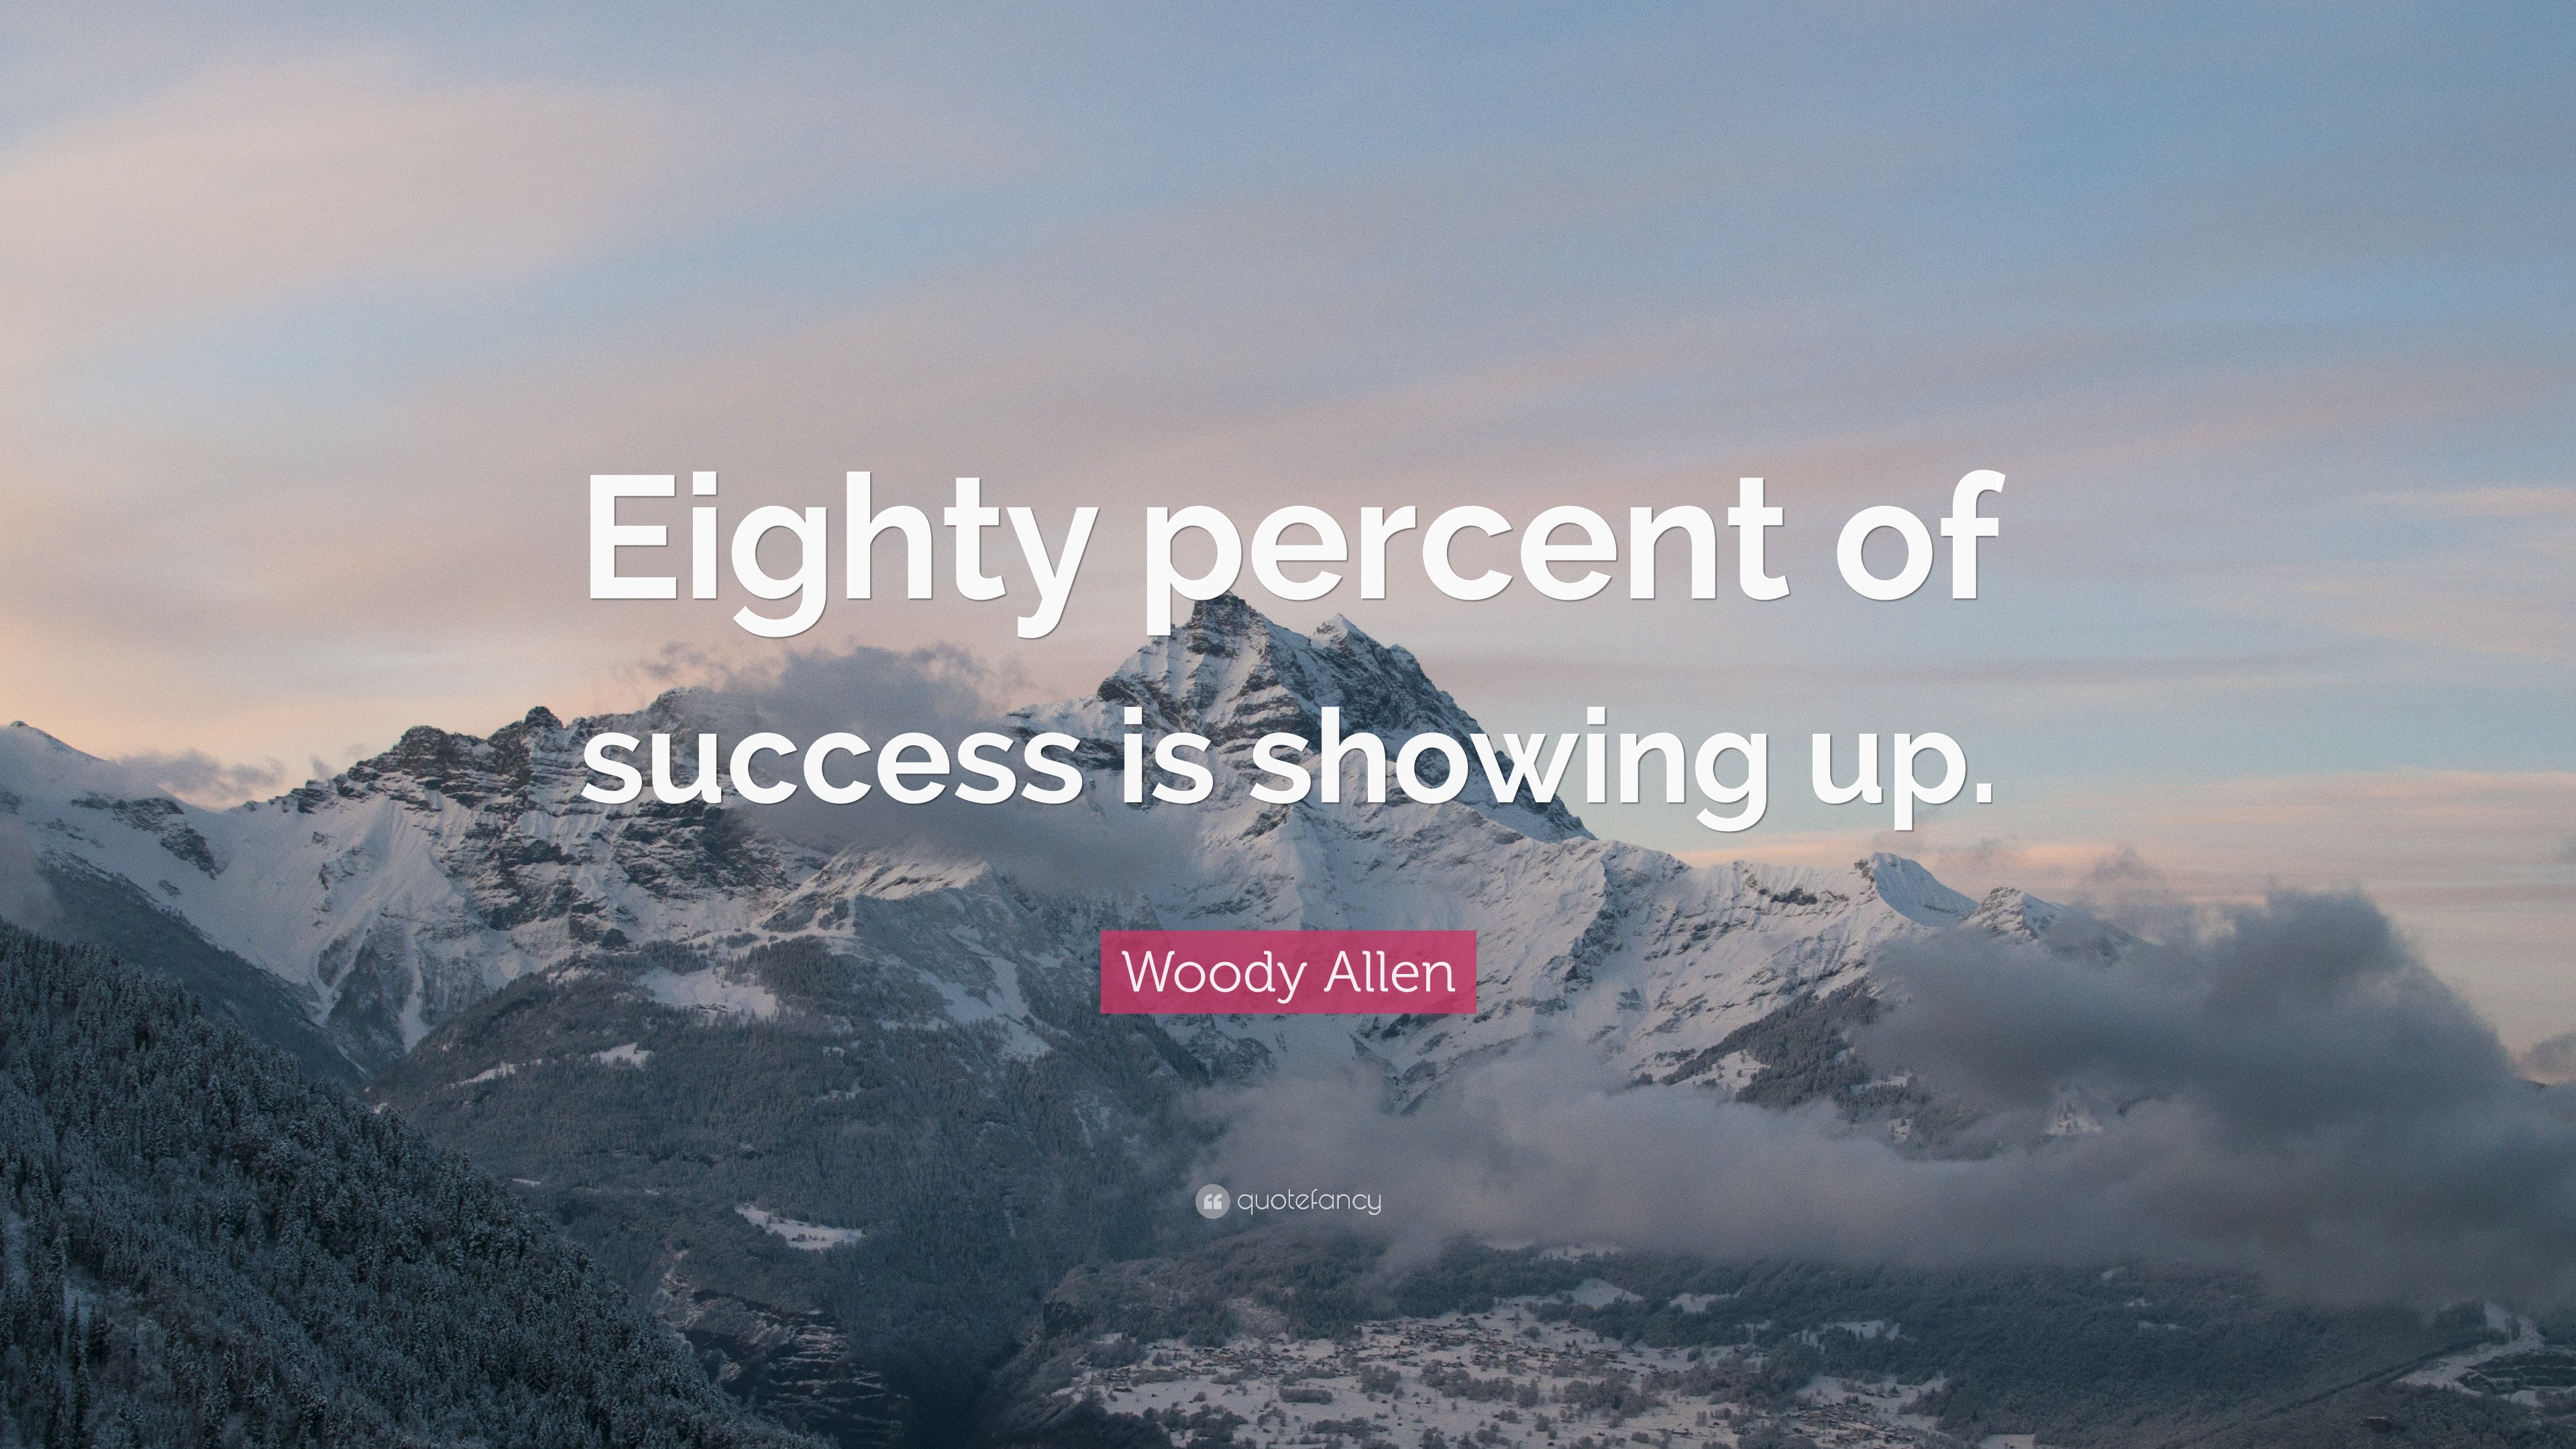 Woody Allen Quote “eighty Percent Of Success Is Showing Up” 23 Wallpapers Quotefancy 2822